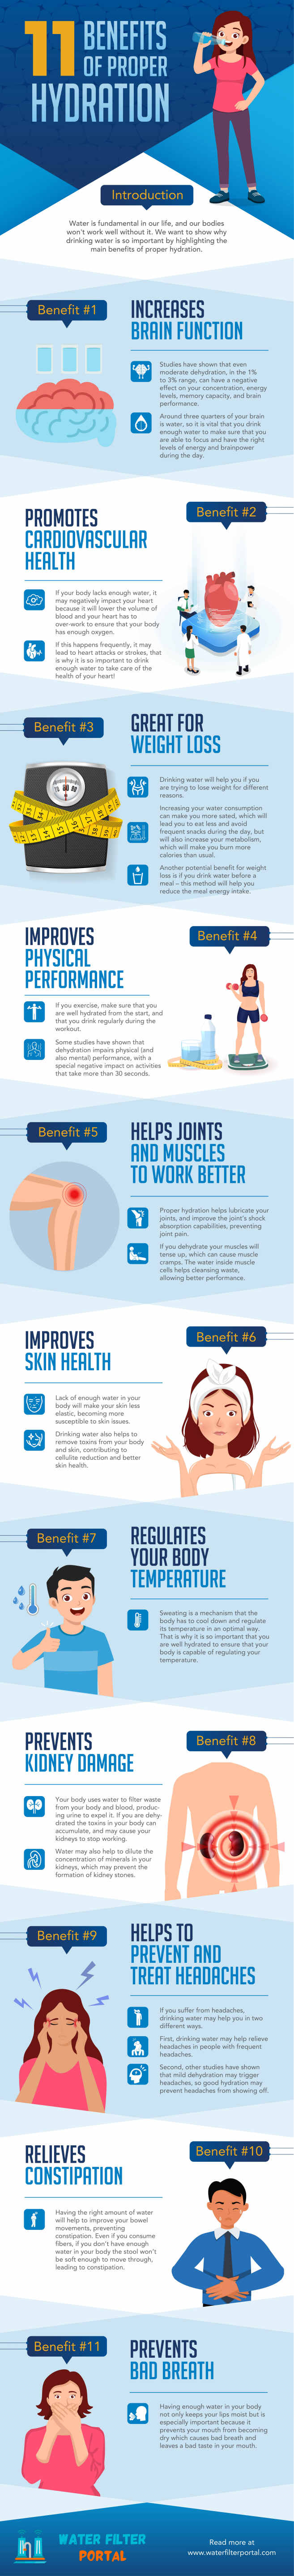 Water Filter Portal infographic benefits of proper hydration